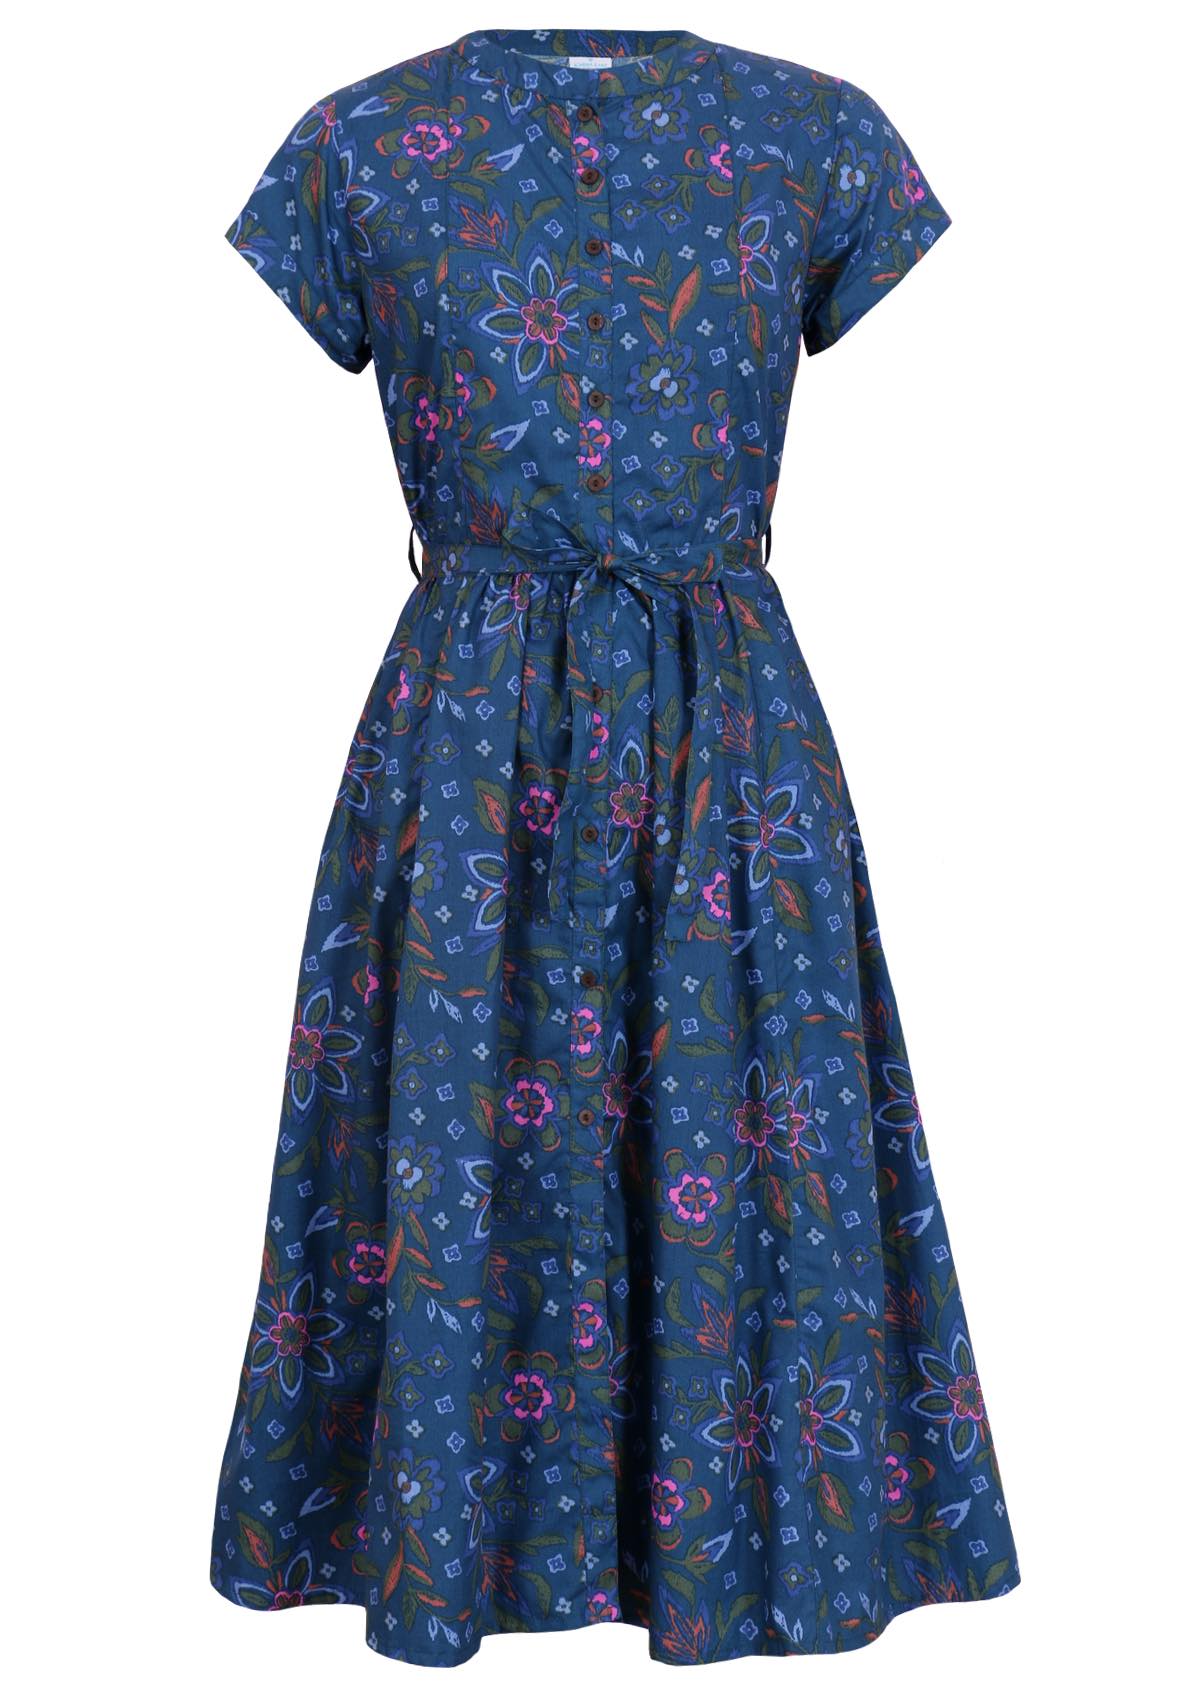 100% cotton retro style dress has a blue base with green, orange and pink florals. 